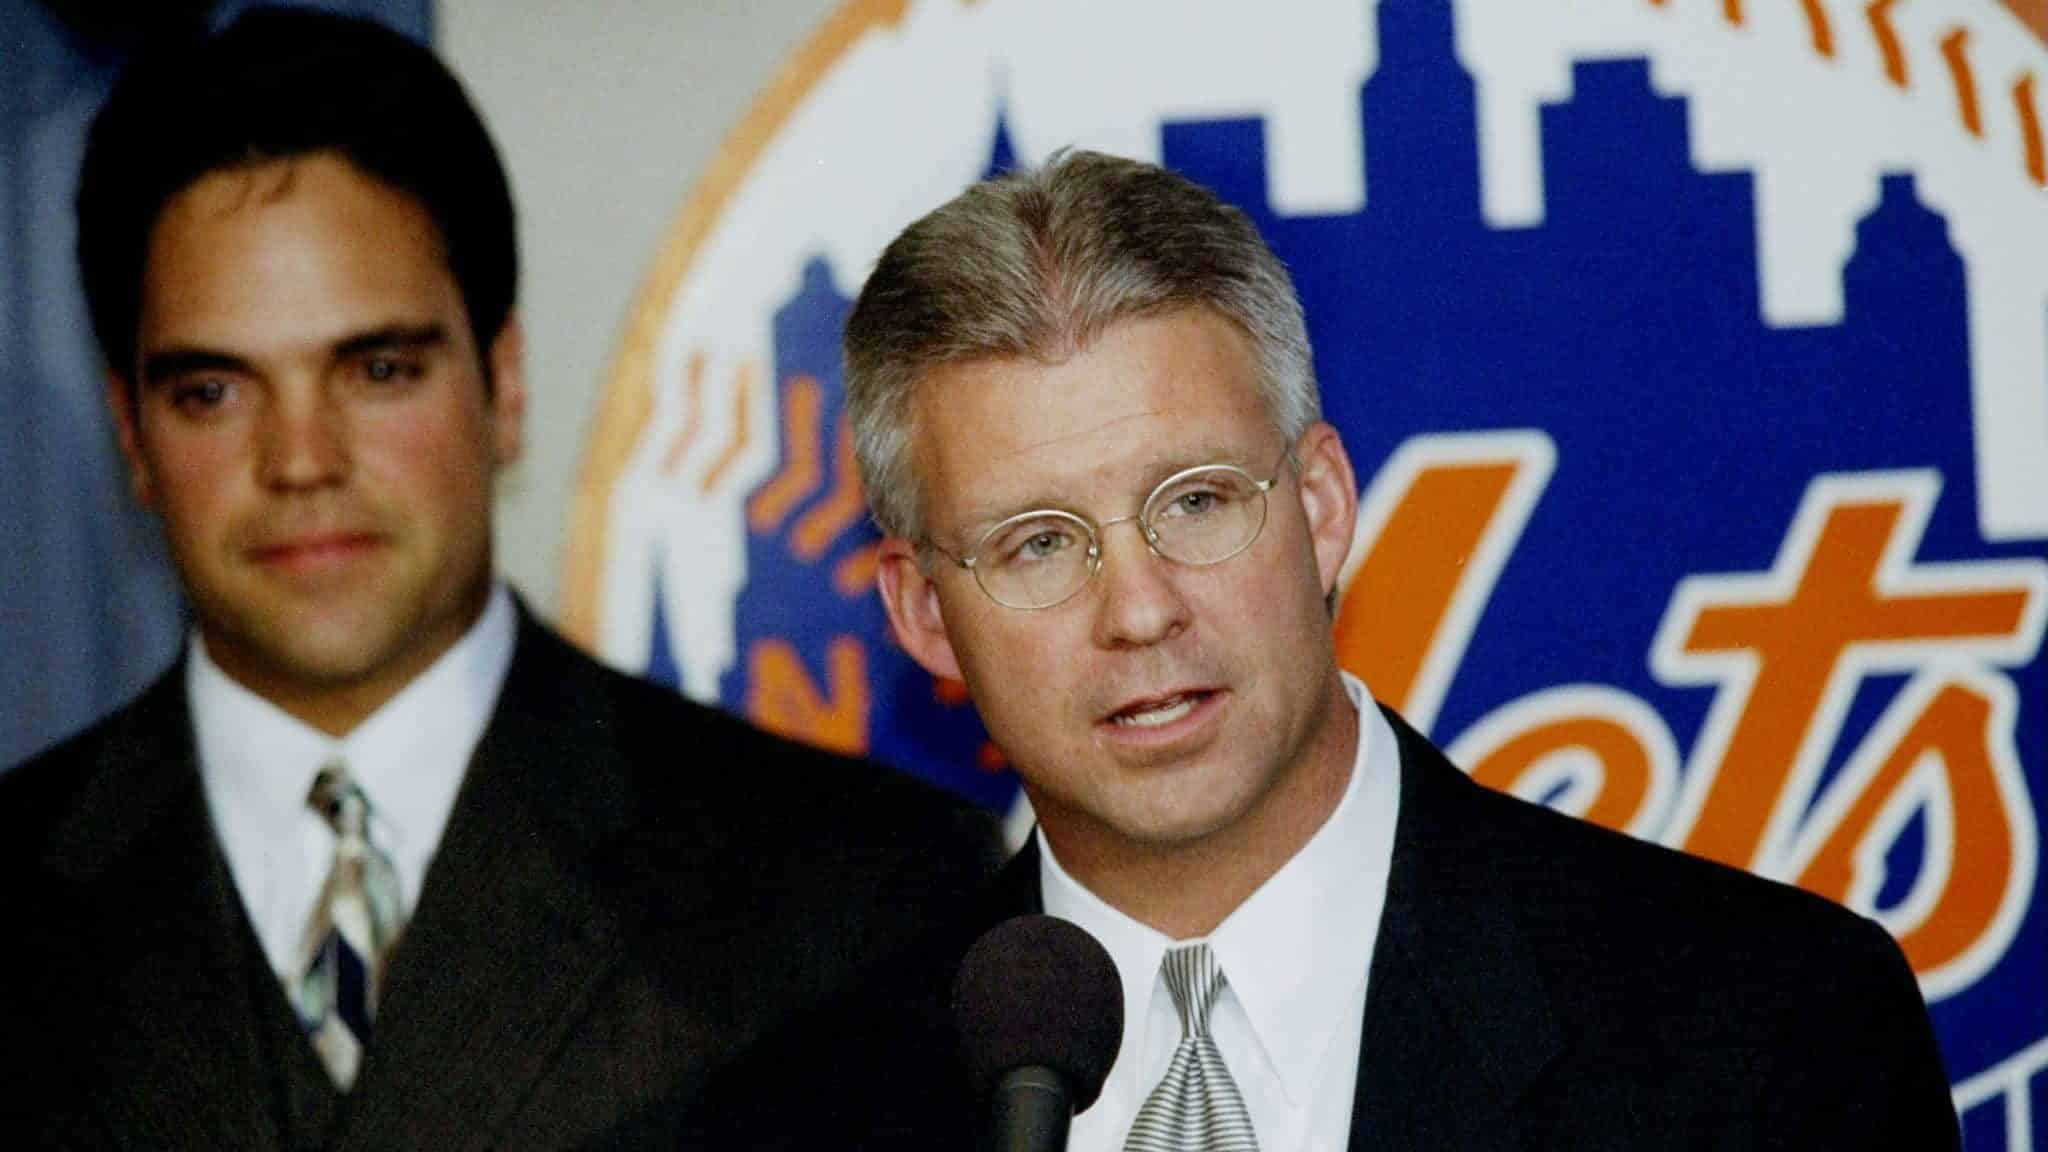 NEW YORK - OCTOBER 26: General Manager Steve Phillips (R) of the New York Mets talks during a press conference about Mike Piazza (L) October 26, 1998 in New York City. Phillips has been fired June 12, 2003 by the New York Mets after the team has languished in the bottom of the standings,15 games behind the first place Atlanta Braves.